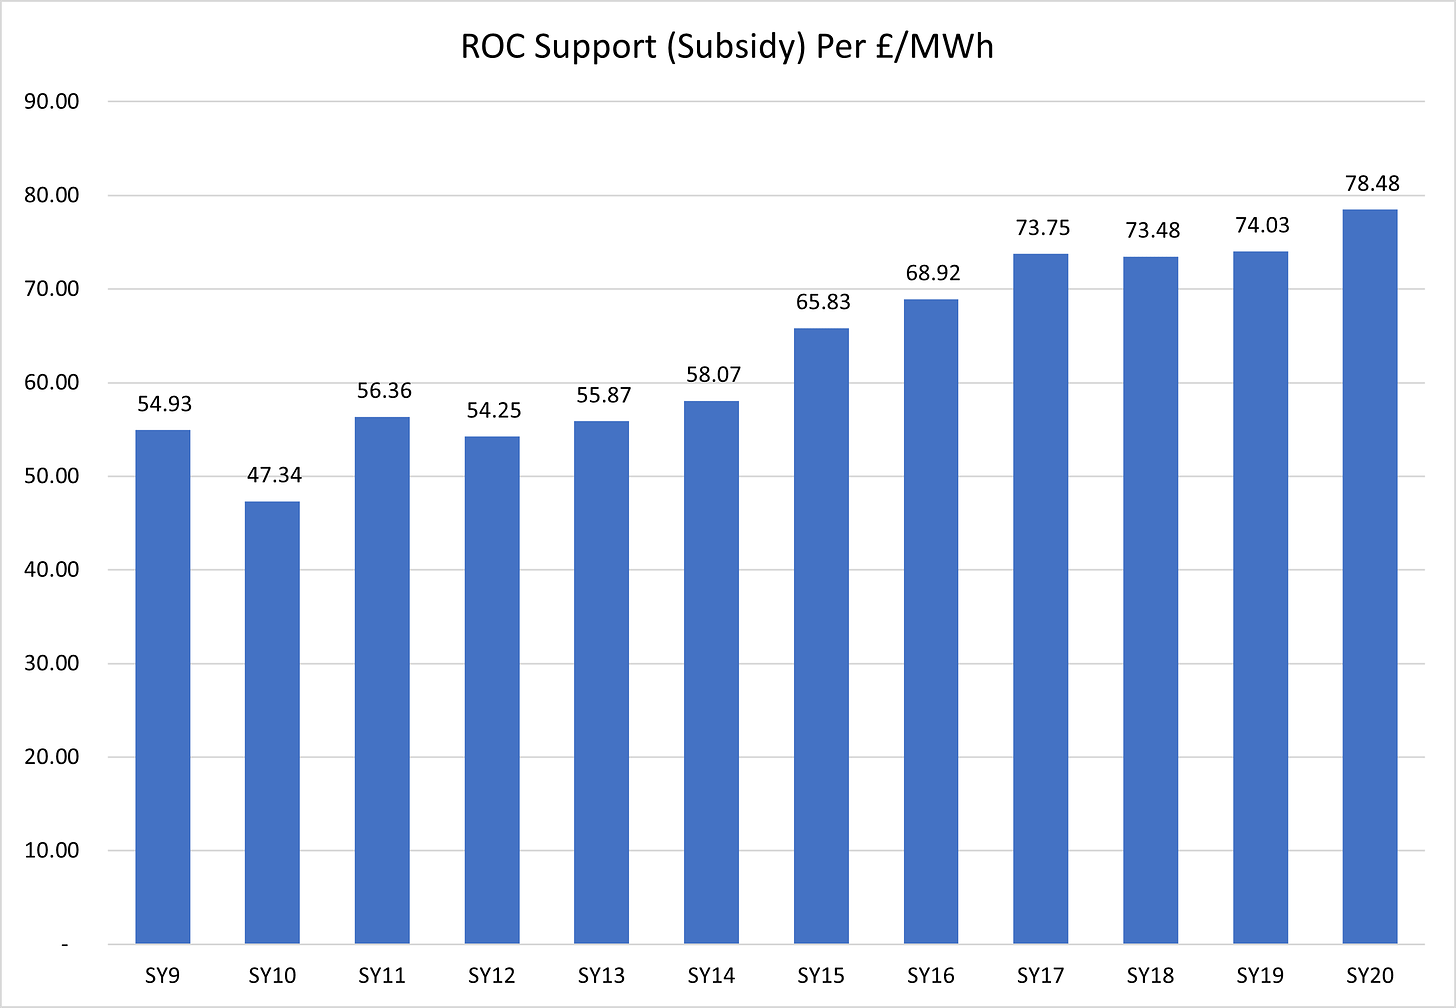 Figure 4 - ROC Support (Subsidy) per MWh Generated (£ per MWh) by Year